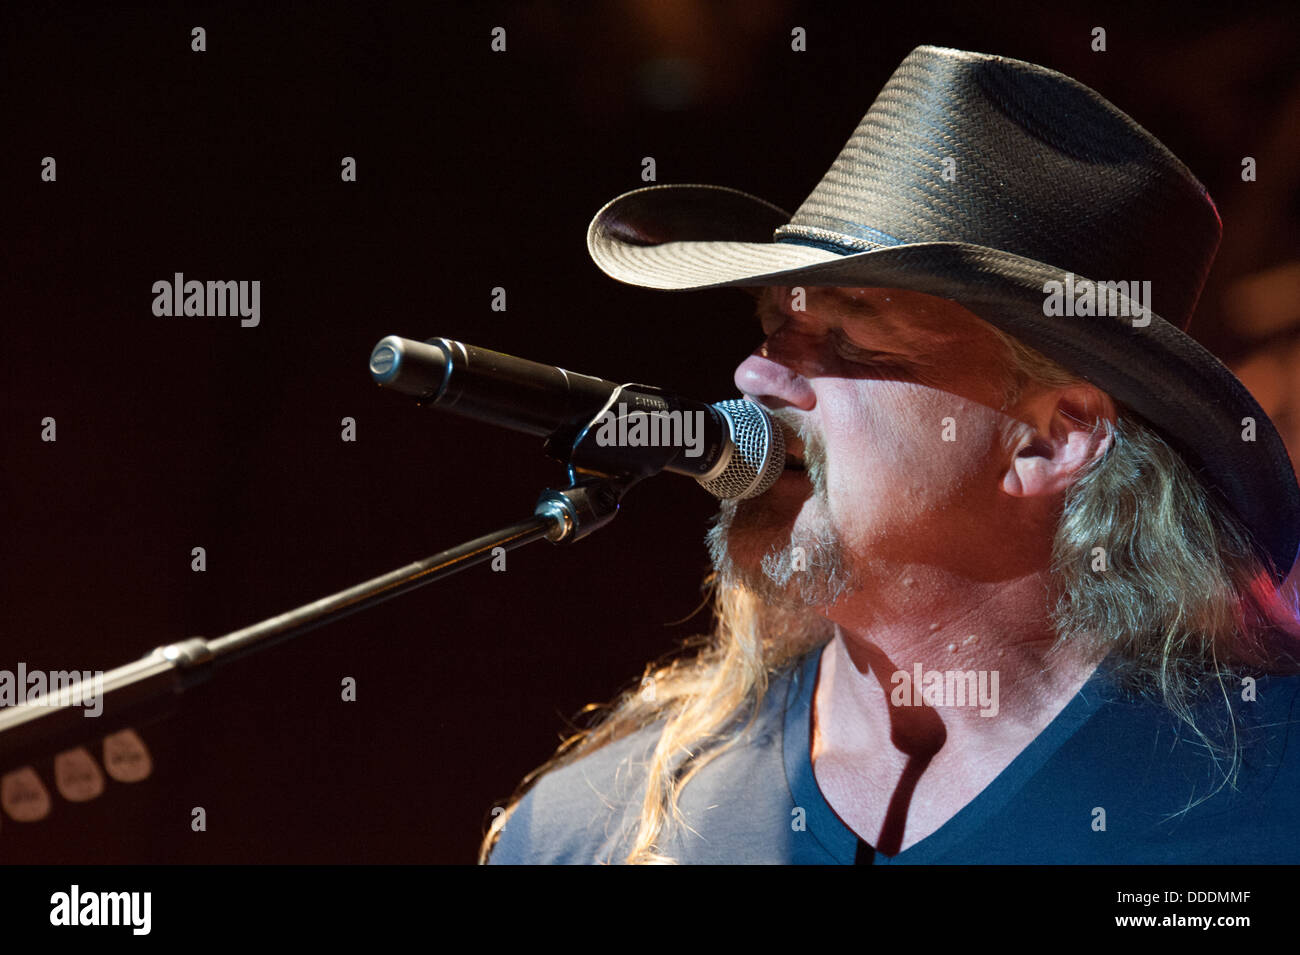 CITRUS HEIGHTS, CA - August 29: Trace Adkins performs at the Sunrise at Night Concert Series at Sunrise Marketplace Stock Photo